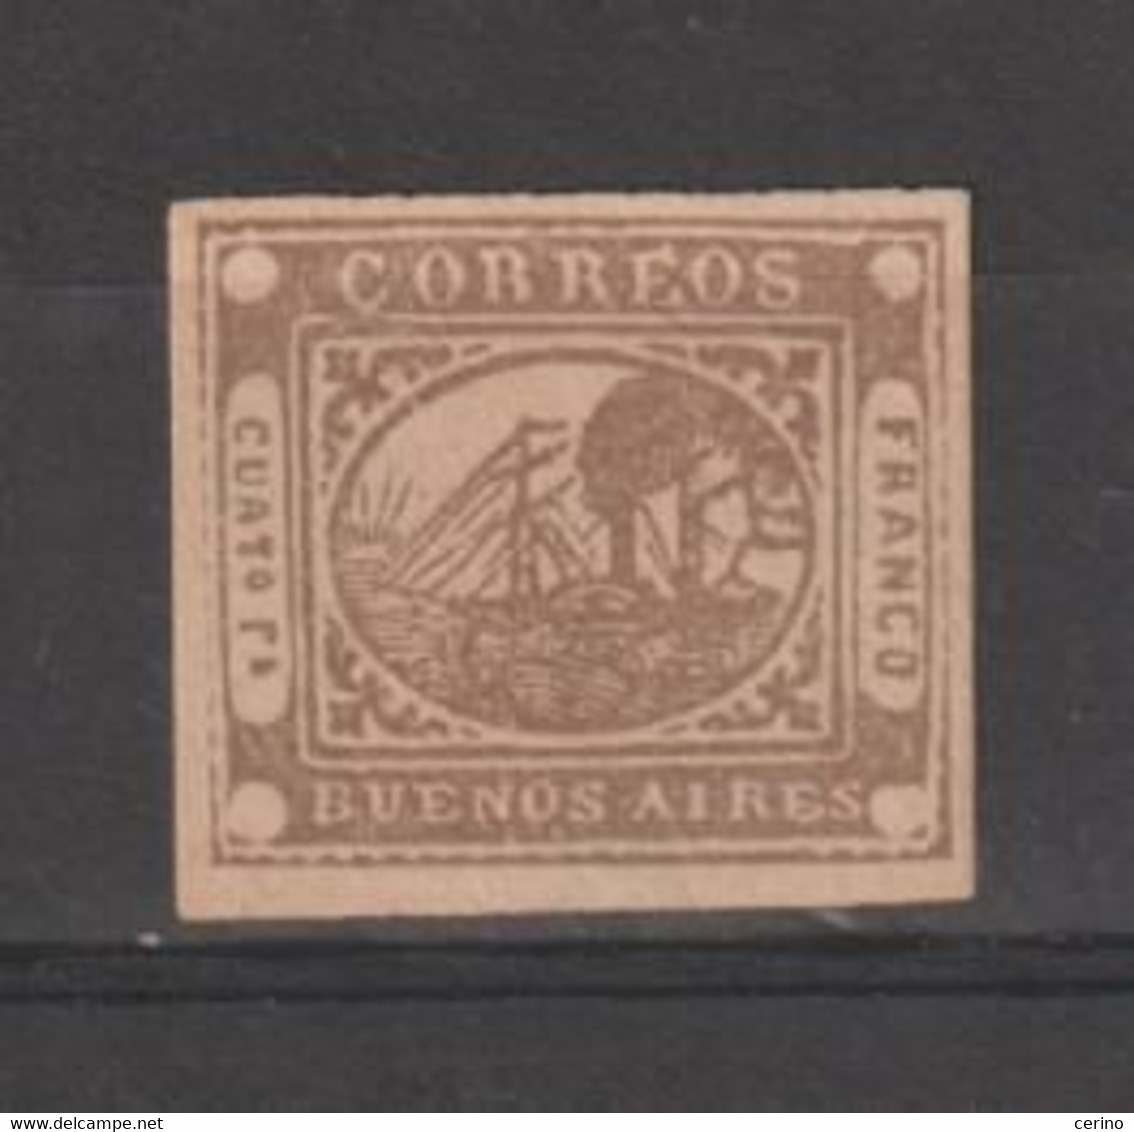 BUENOS  AIRES:  1858  OVALE  -  4 R. BRUNO  S.G. -  FAKE  COPY  -  YV/TELL. (5) - Buenos Aires (1858-1864)